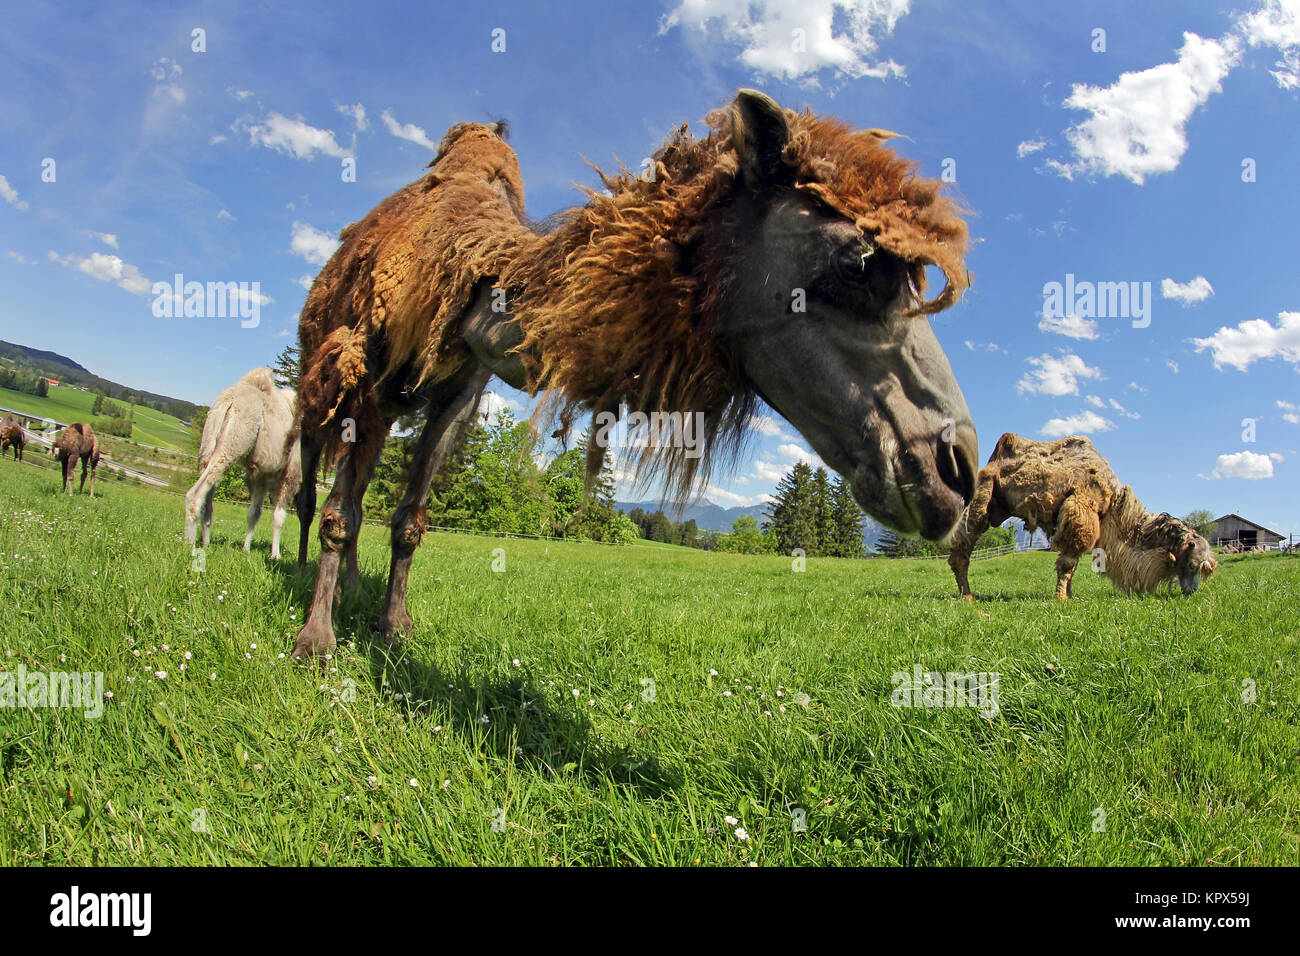 trampeltiere,zweihÃ¶ckriges camels on a meadow in bavaria (allgÃ¤u) Stock Photo